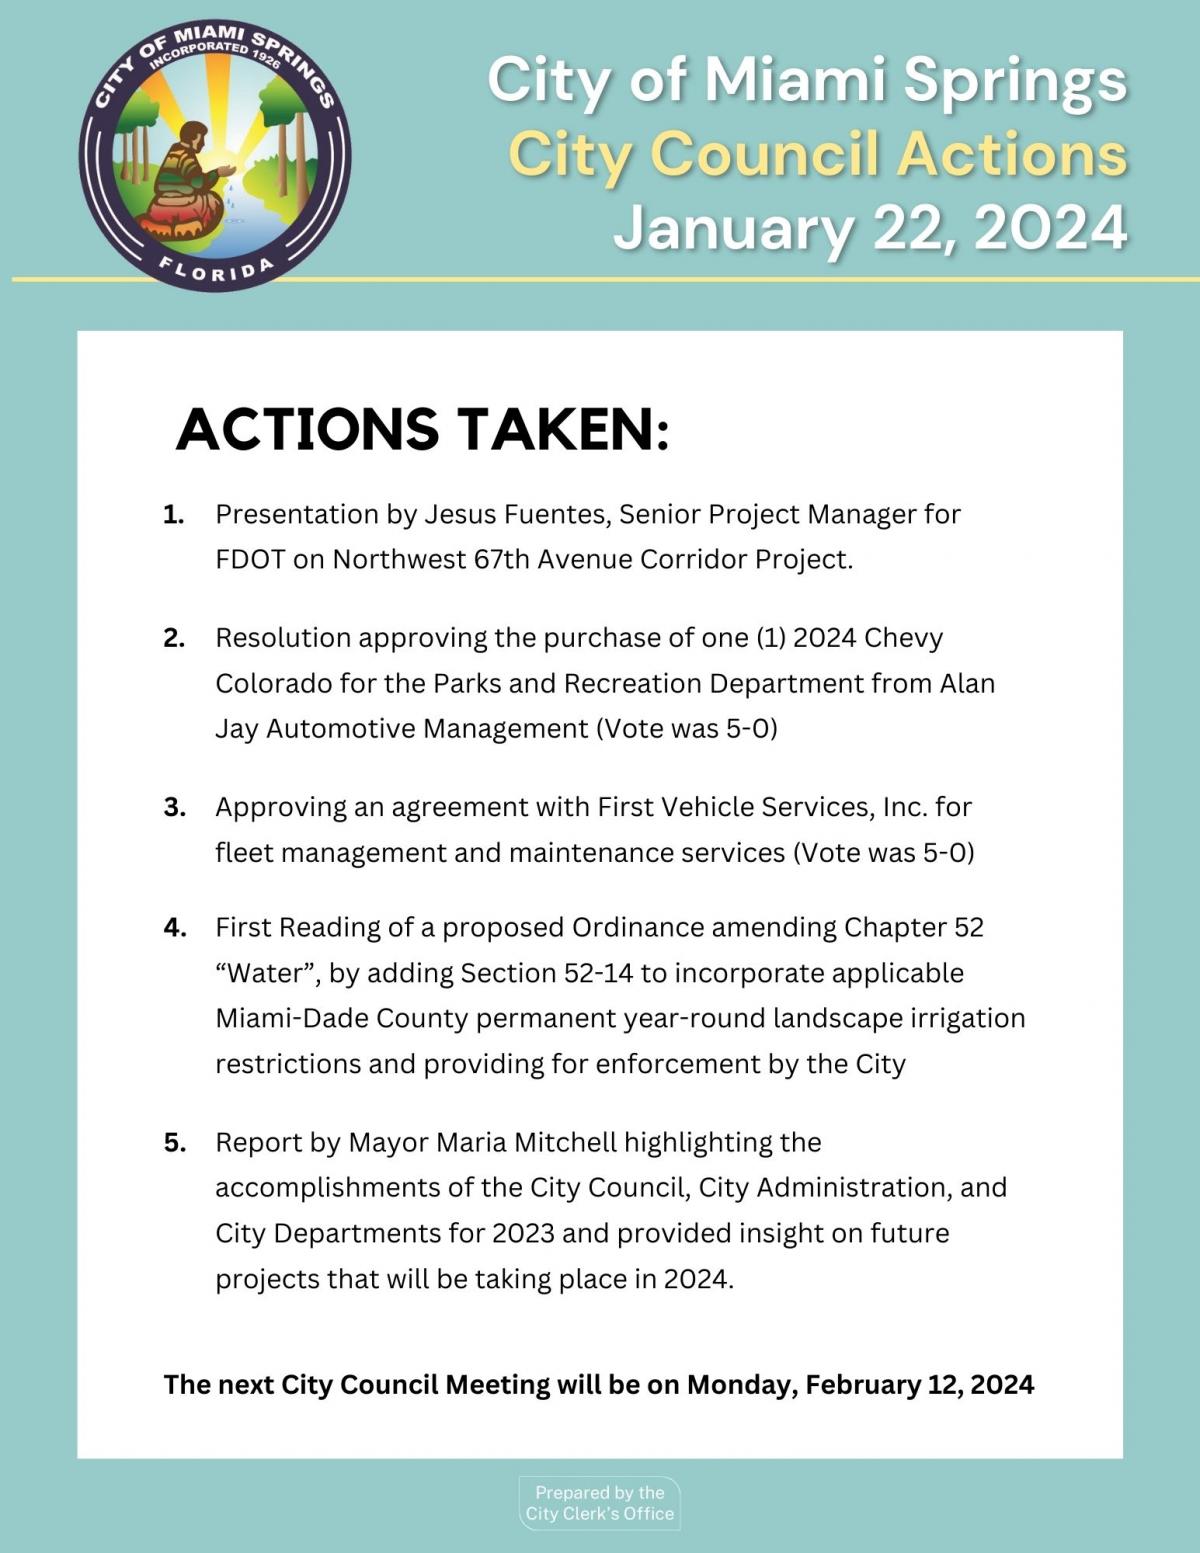 City Council Actions - January 22, 2024